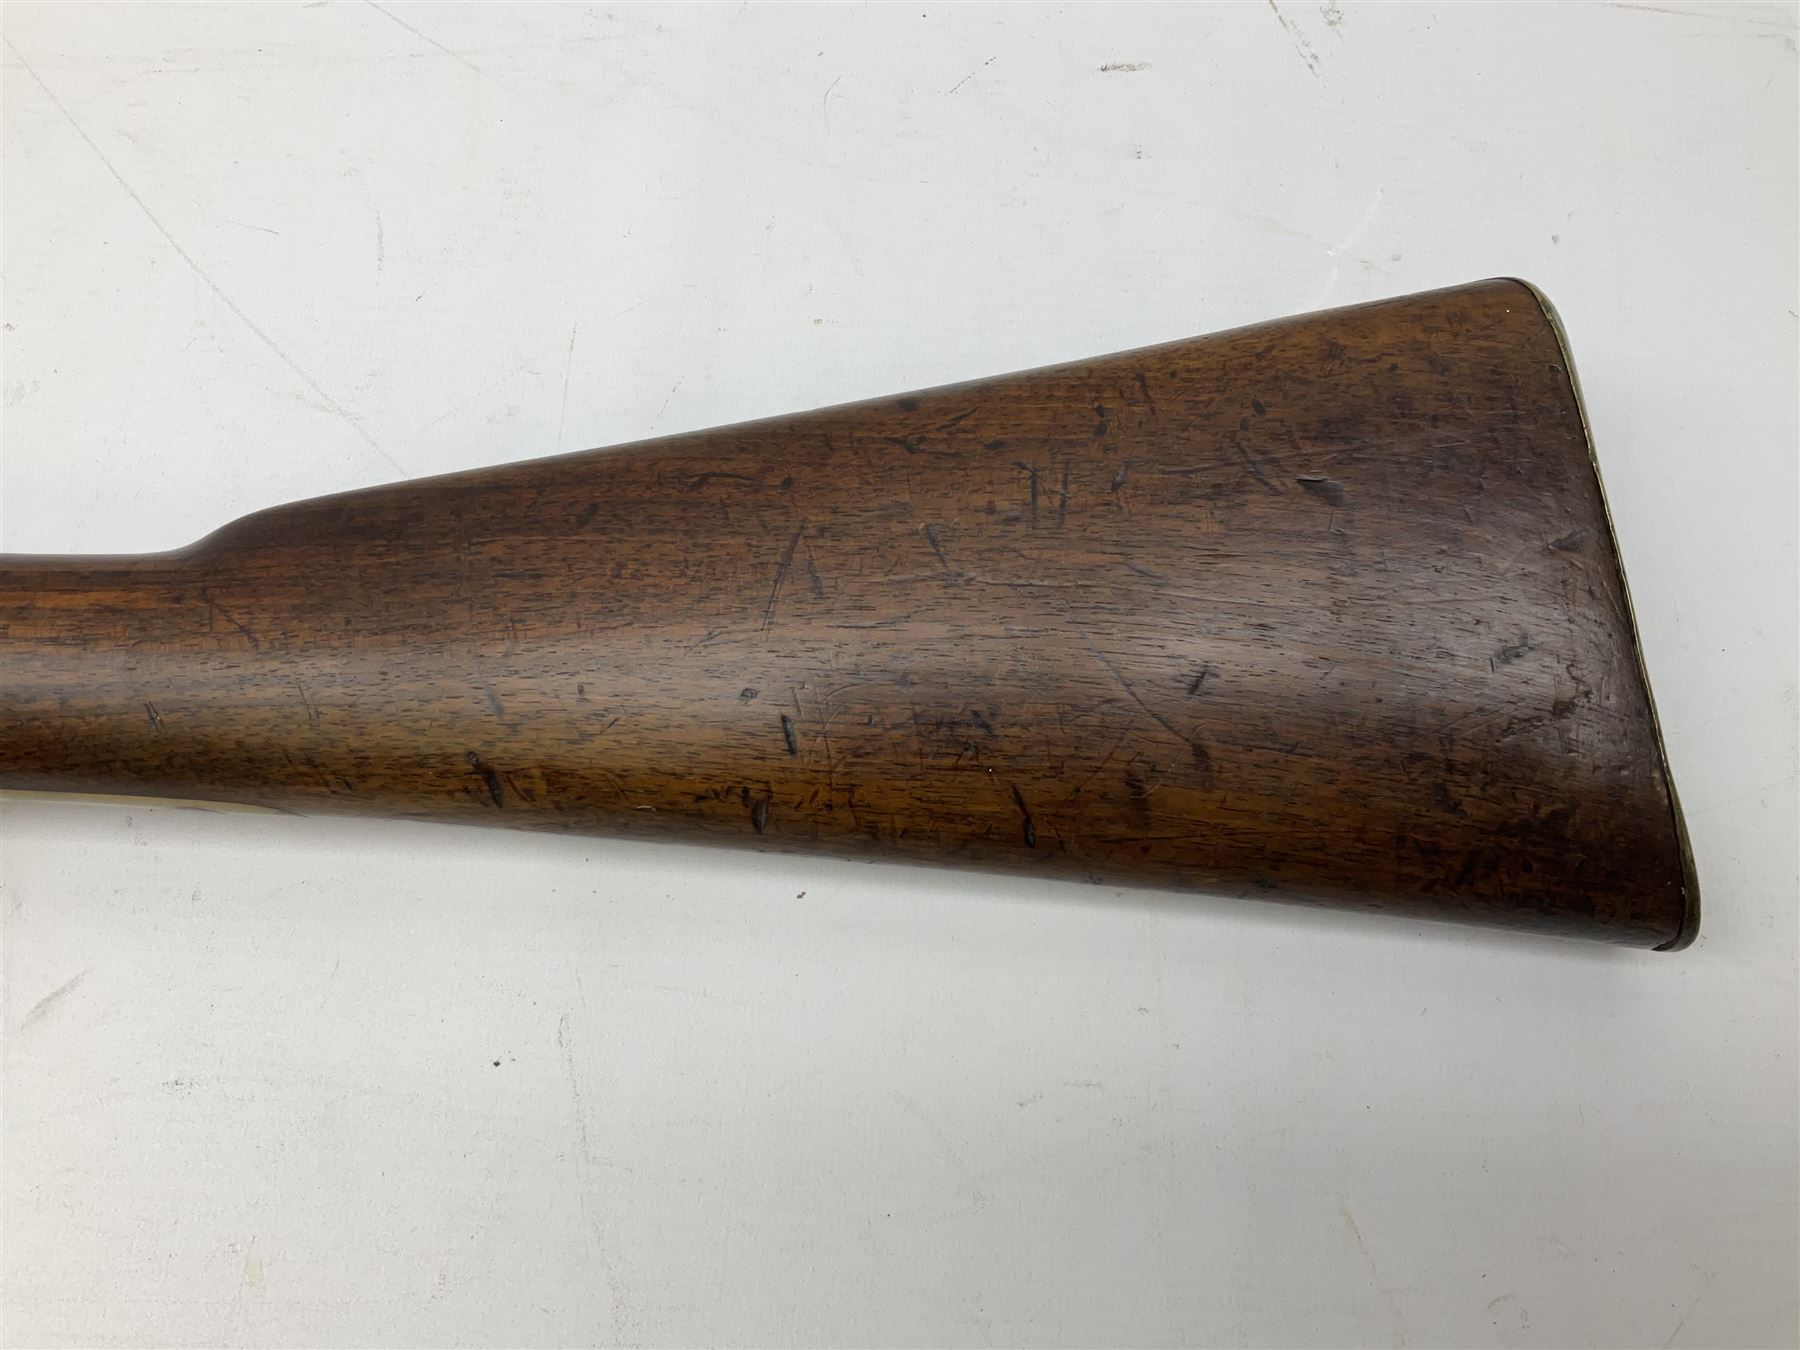 19th century Enfield .577 percussion gun - Image 11 of 16